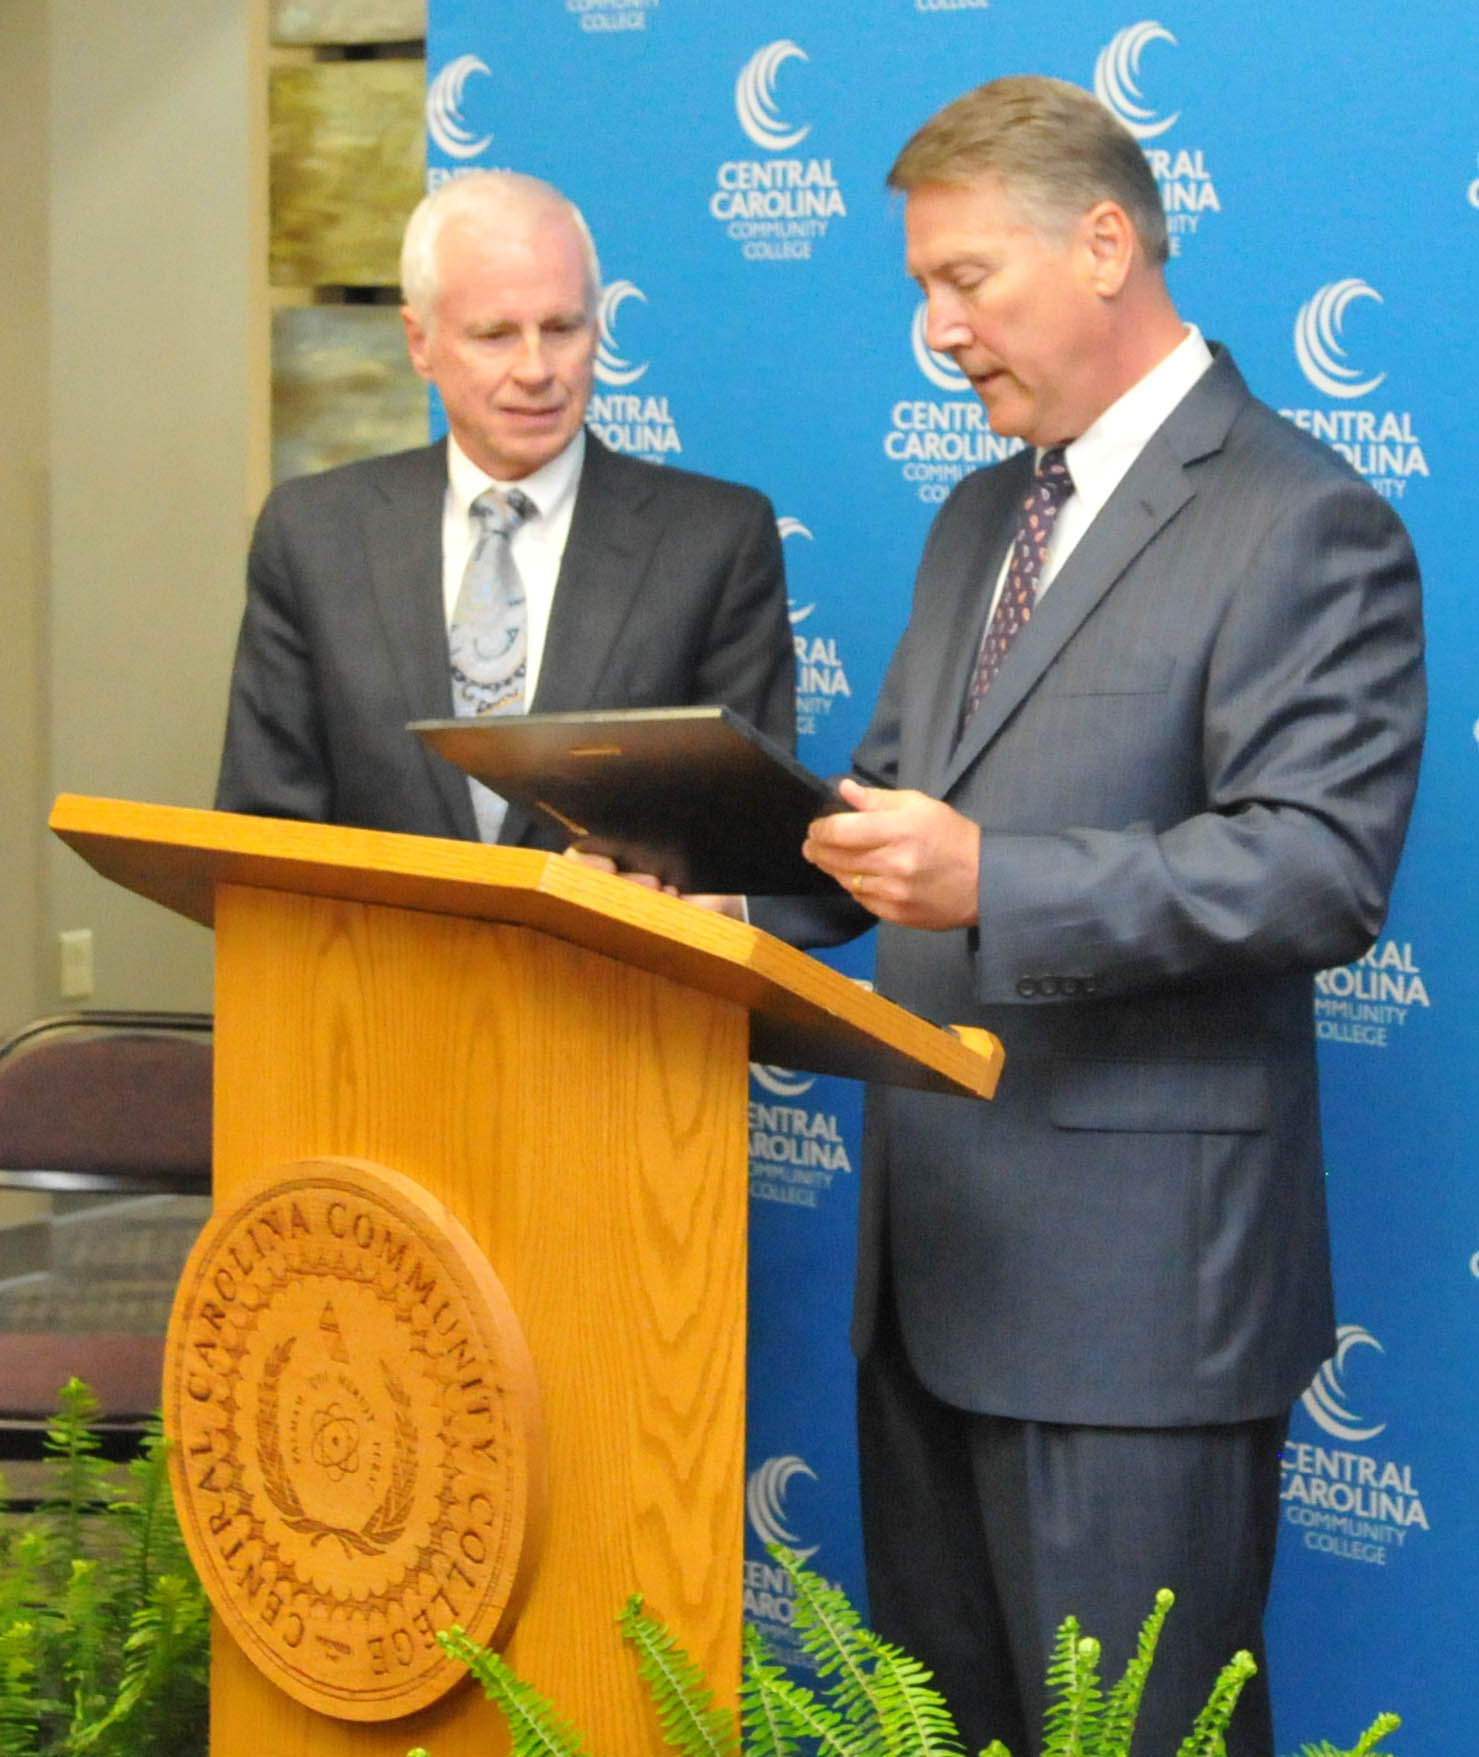 Click to enlarge,  Wayne Staton (left) receives the plaque honoring the naming of the Central Carolina Community College William W. and Ellen B. Staton Department of Paralegal Studies from former North Carolina Lt. Gov. Dennis Wicker (right), a friend of the Staton family who once served with William W. "Bill" Staton in the North Carolina General Assembly.  